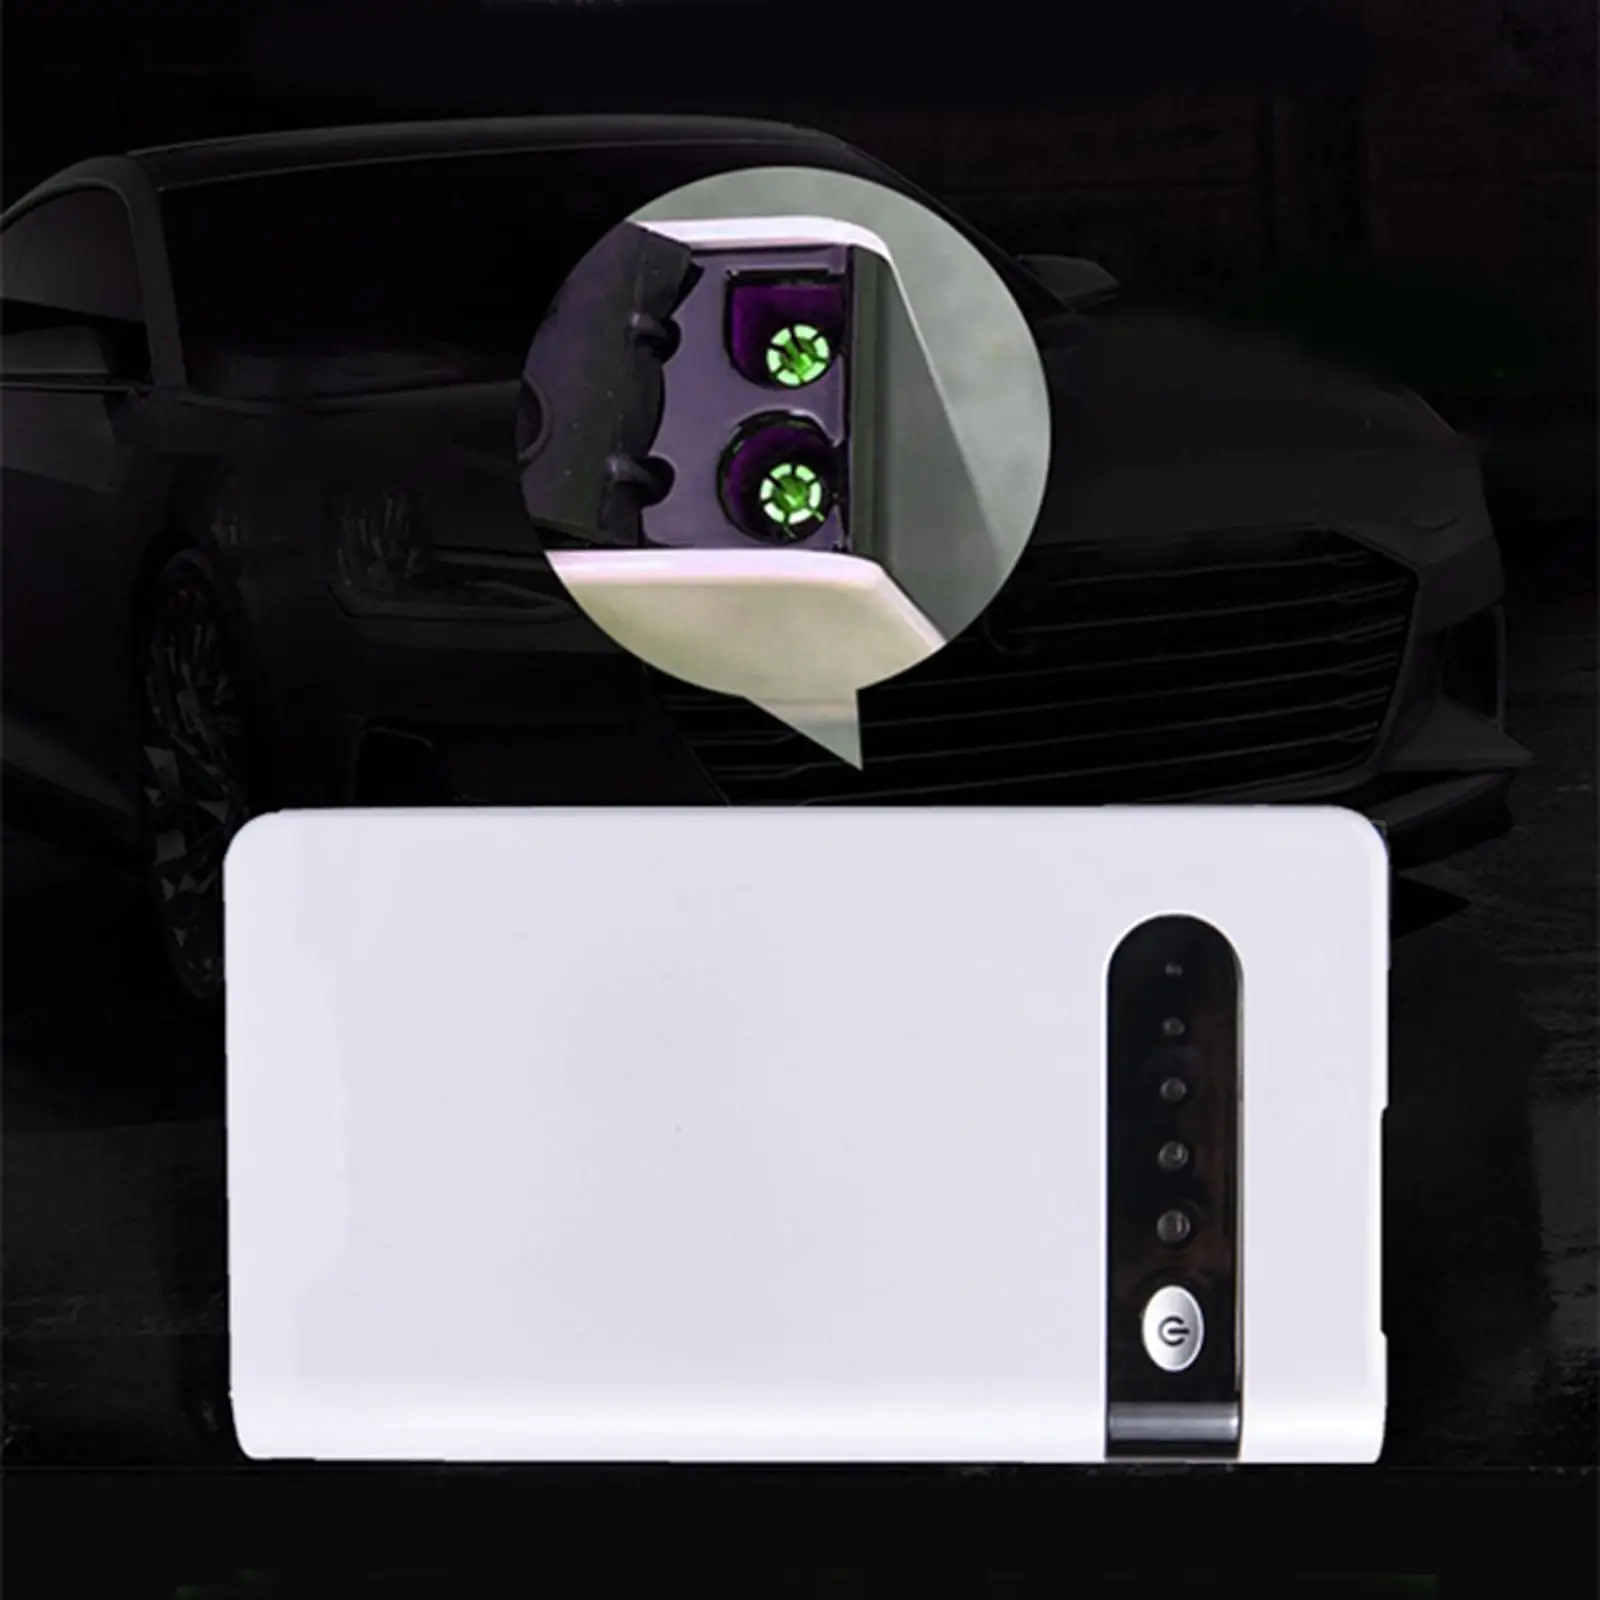 Car Jump Starter with LED Display 12V Auto Battery Booster Power Pack Emergency Start Power for MP4 Laptop Psp Mobile Phone